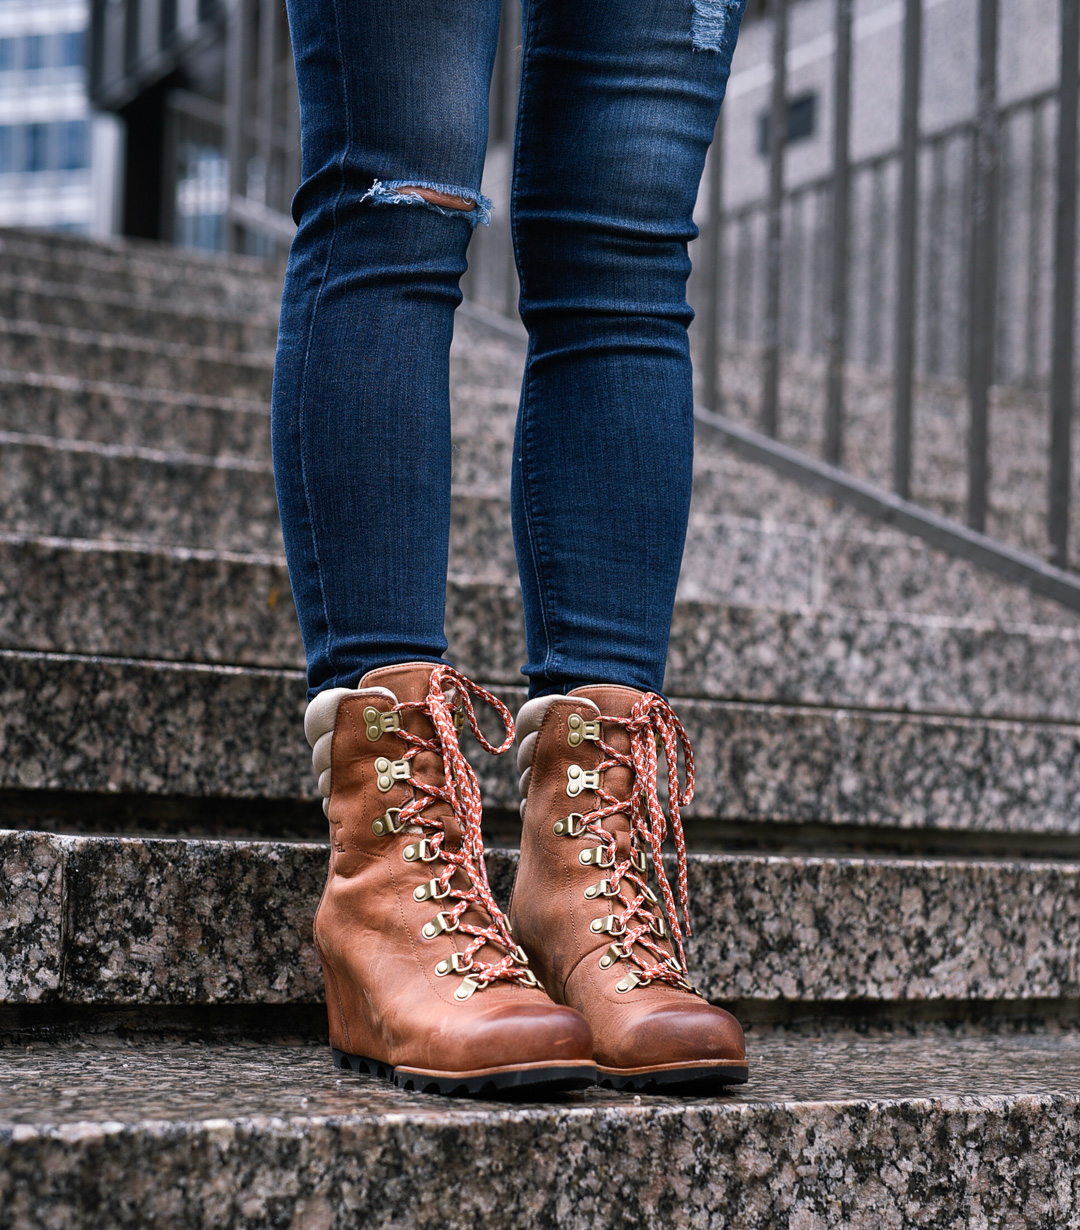 sorel boots with jeans